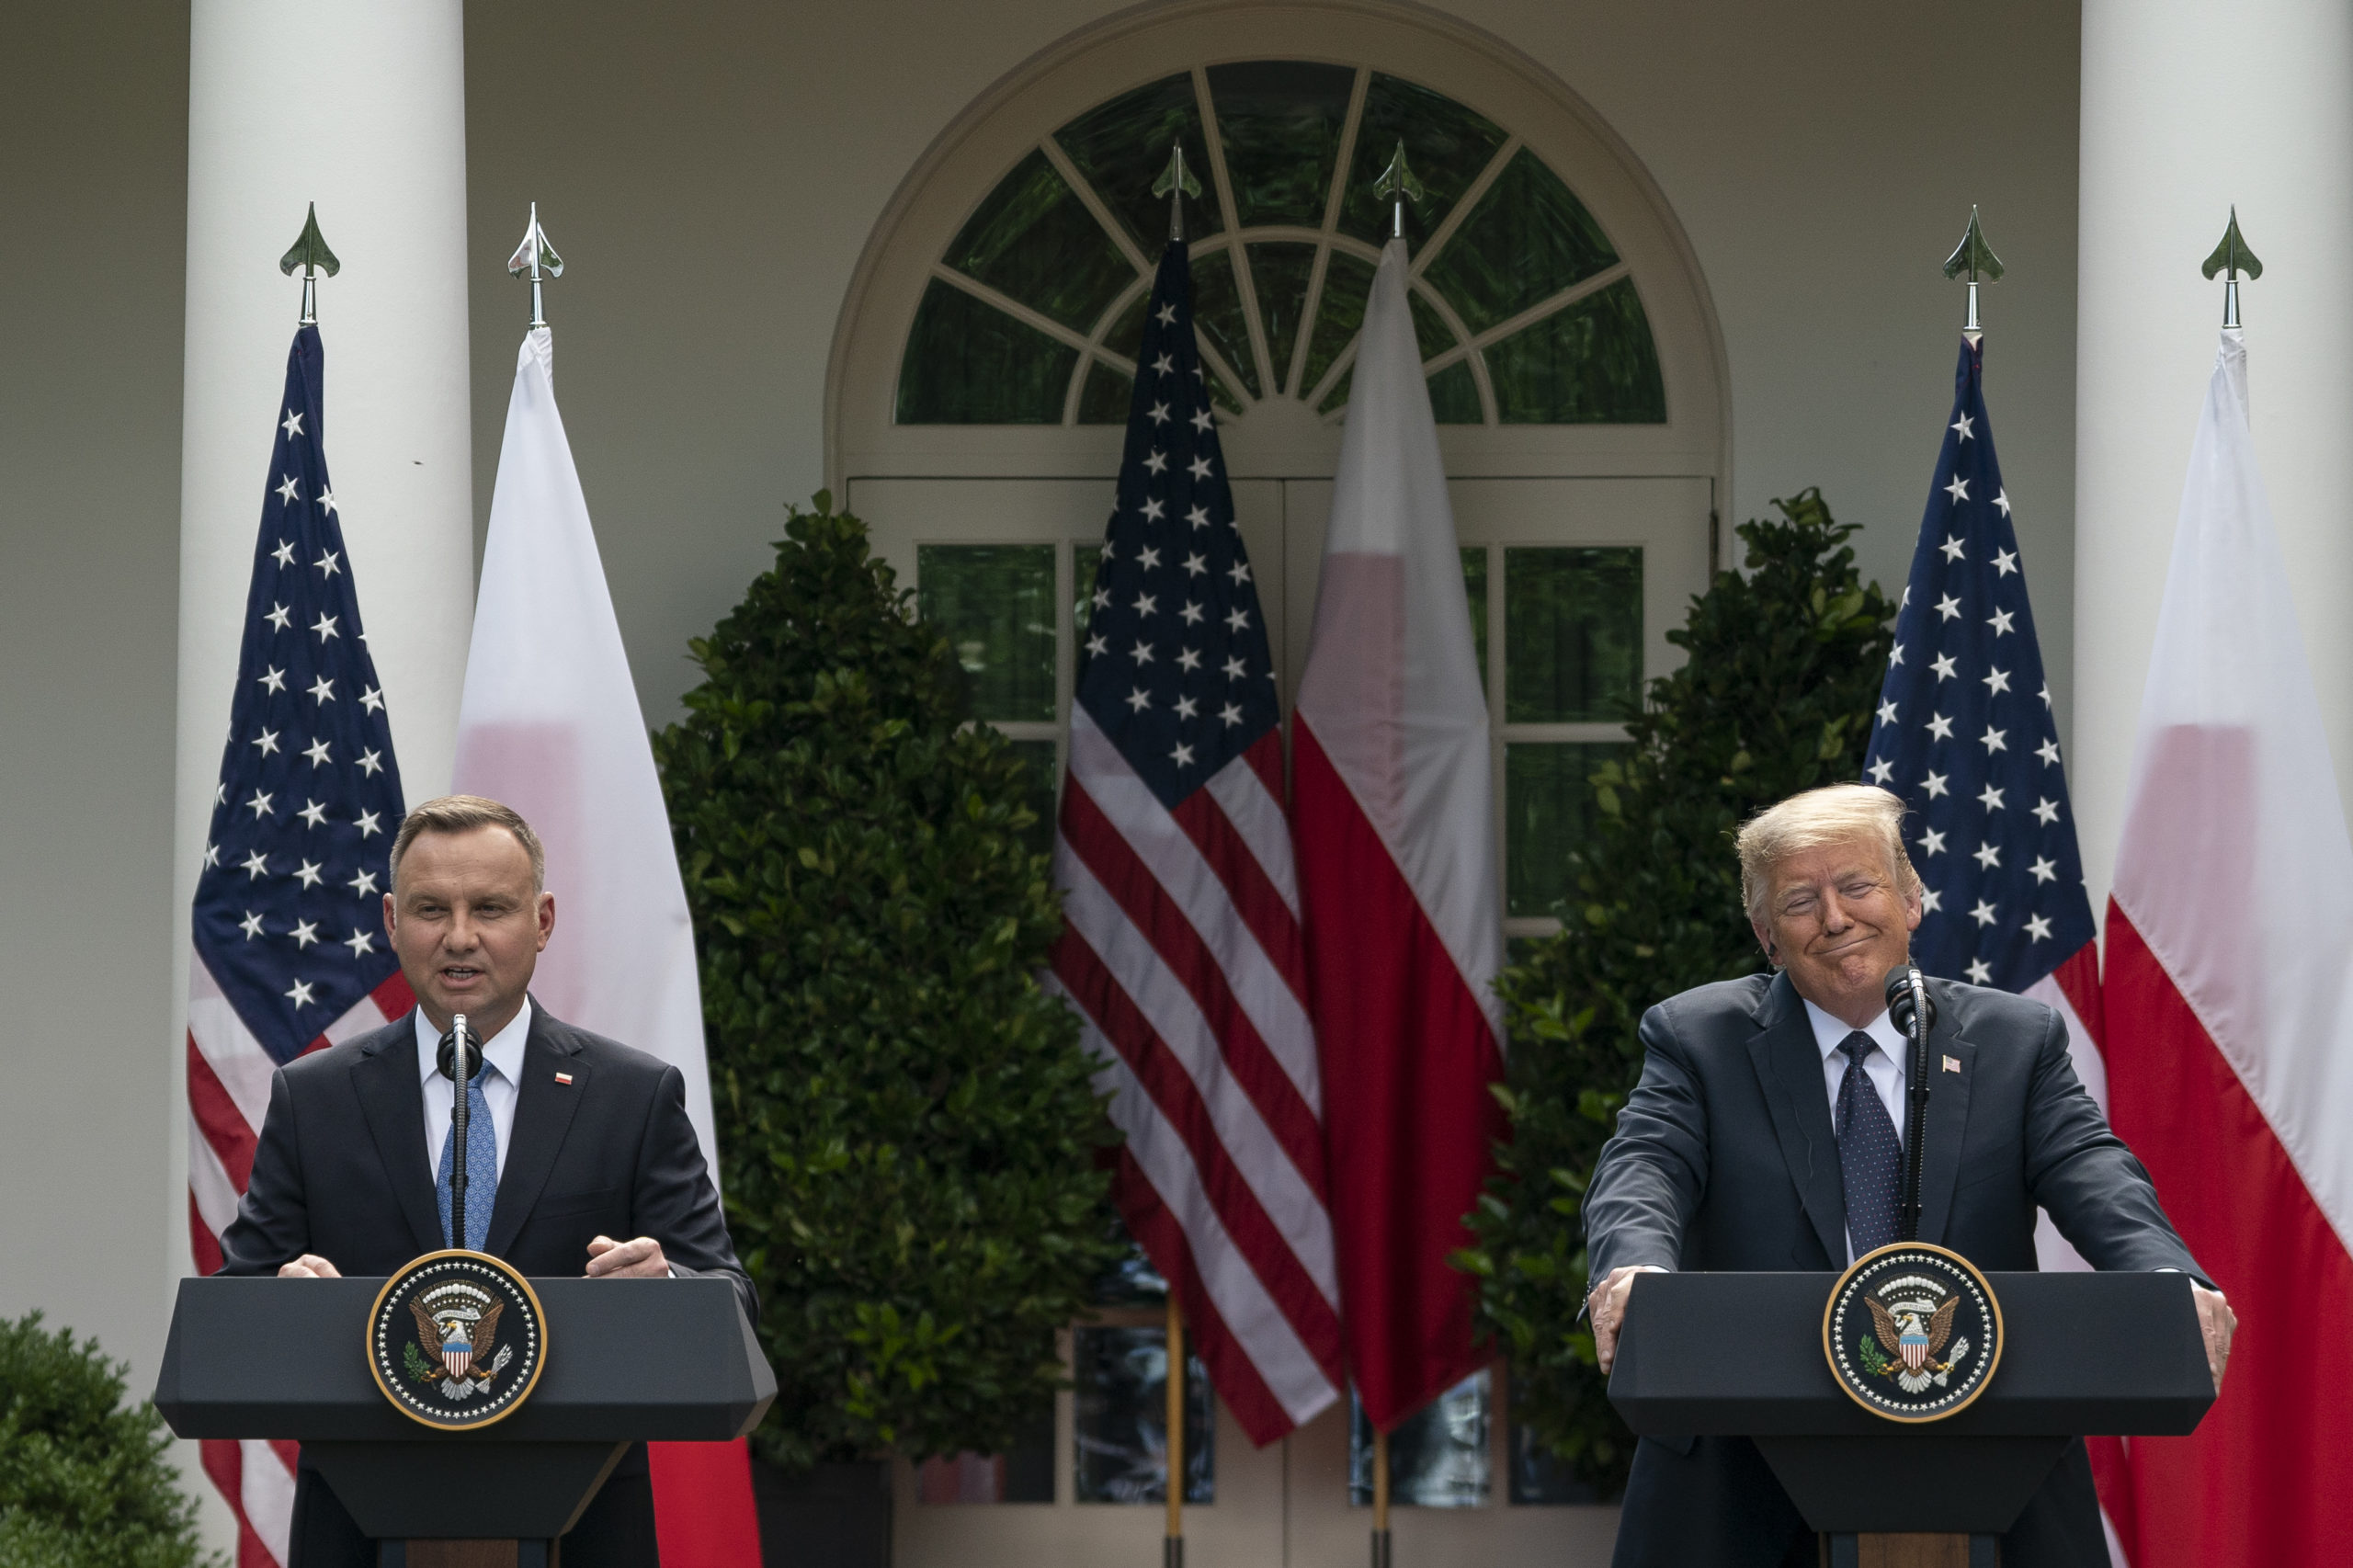 WASHINGTON, DC - JUNE 24: (L-R) Polish President Andrzej Duda speaks as U.S. President Donald Trump looks on during a joint news conference in the Rose Garden of the White House on June 24, 2020 in Washington, DC. Duda, who faces a tight re-election contest in four days, is Trump's first world-leader visit from overseas since the coronavirus pandemic began. (Photo by Drew Angerer/Getty Images)